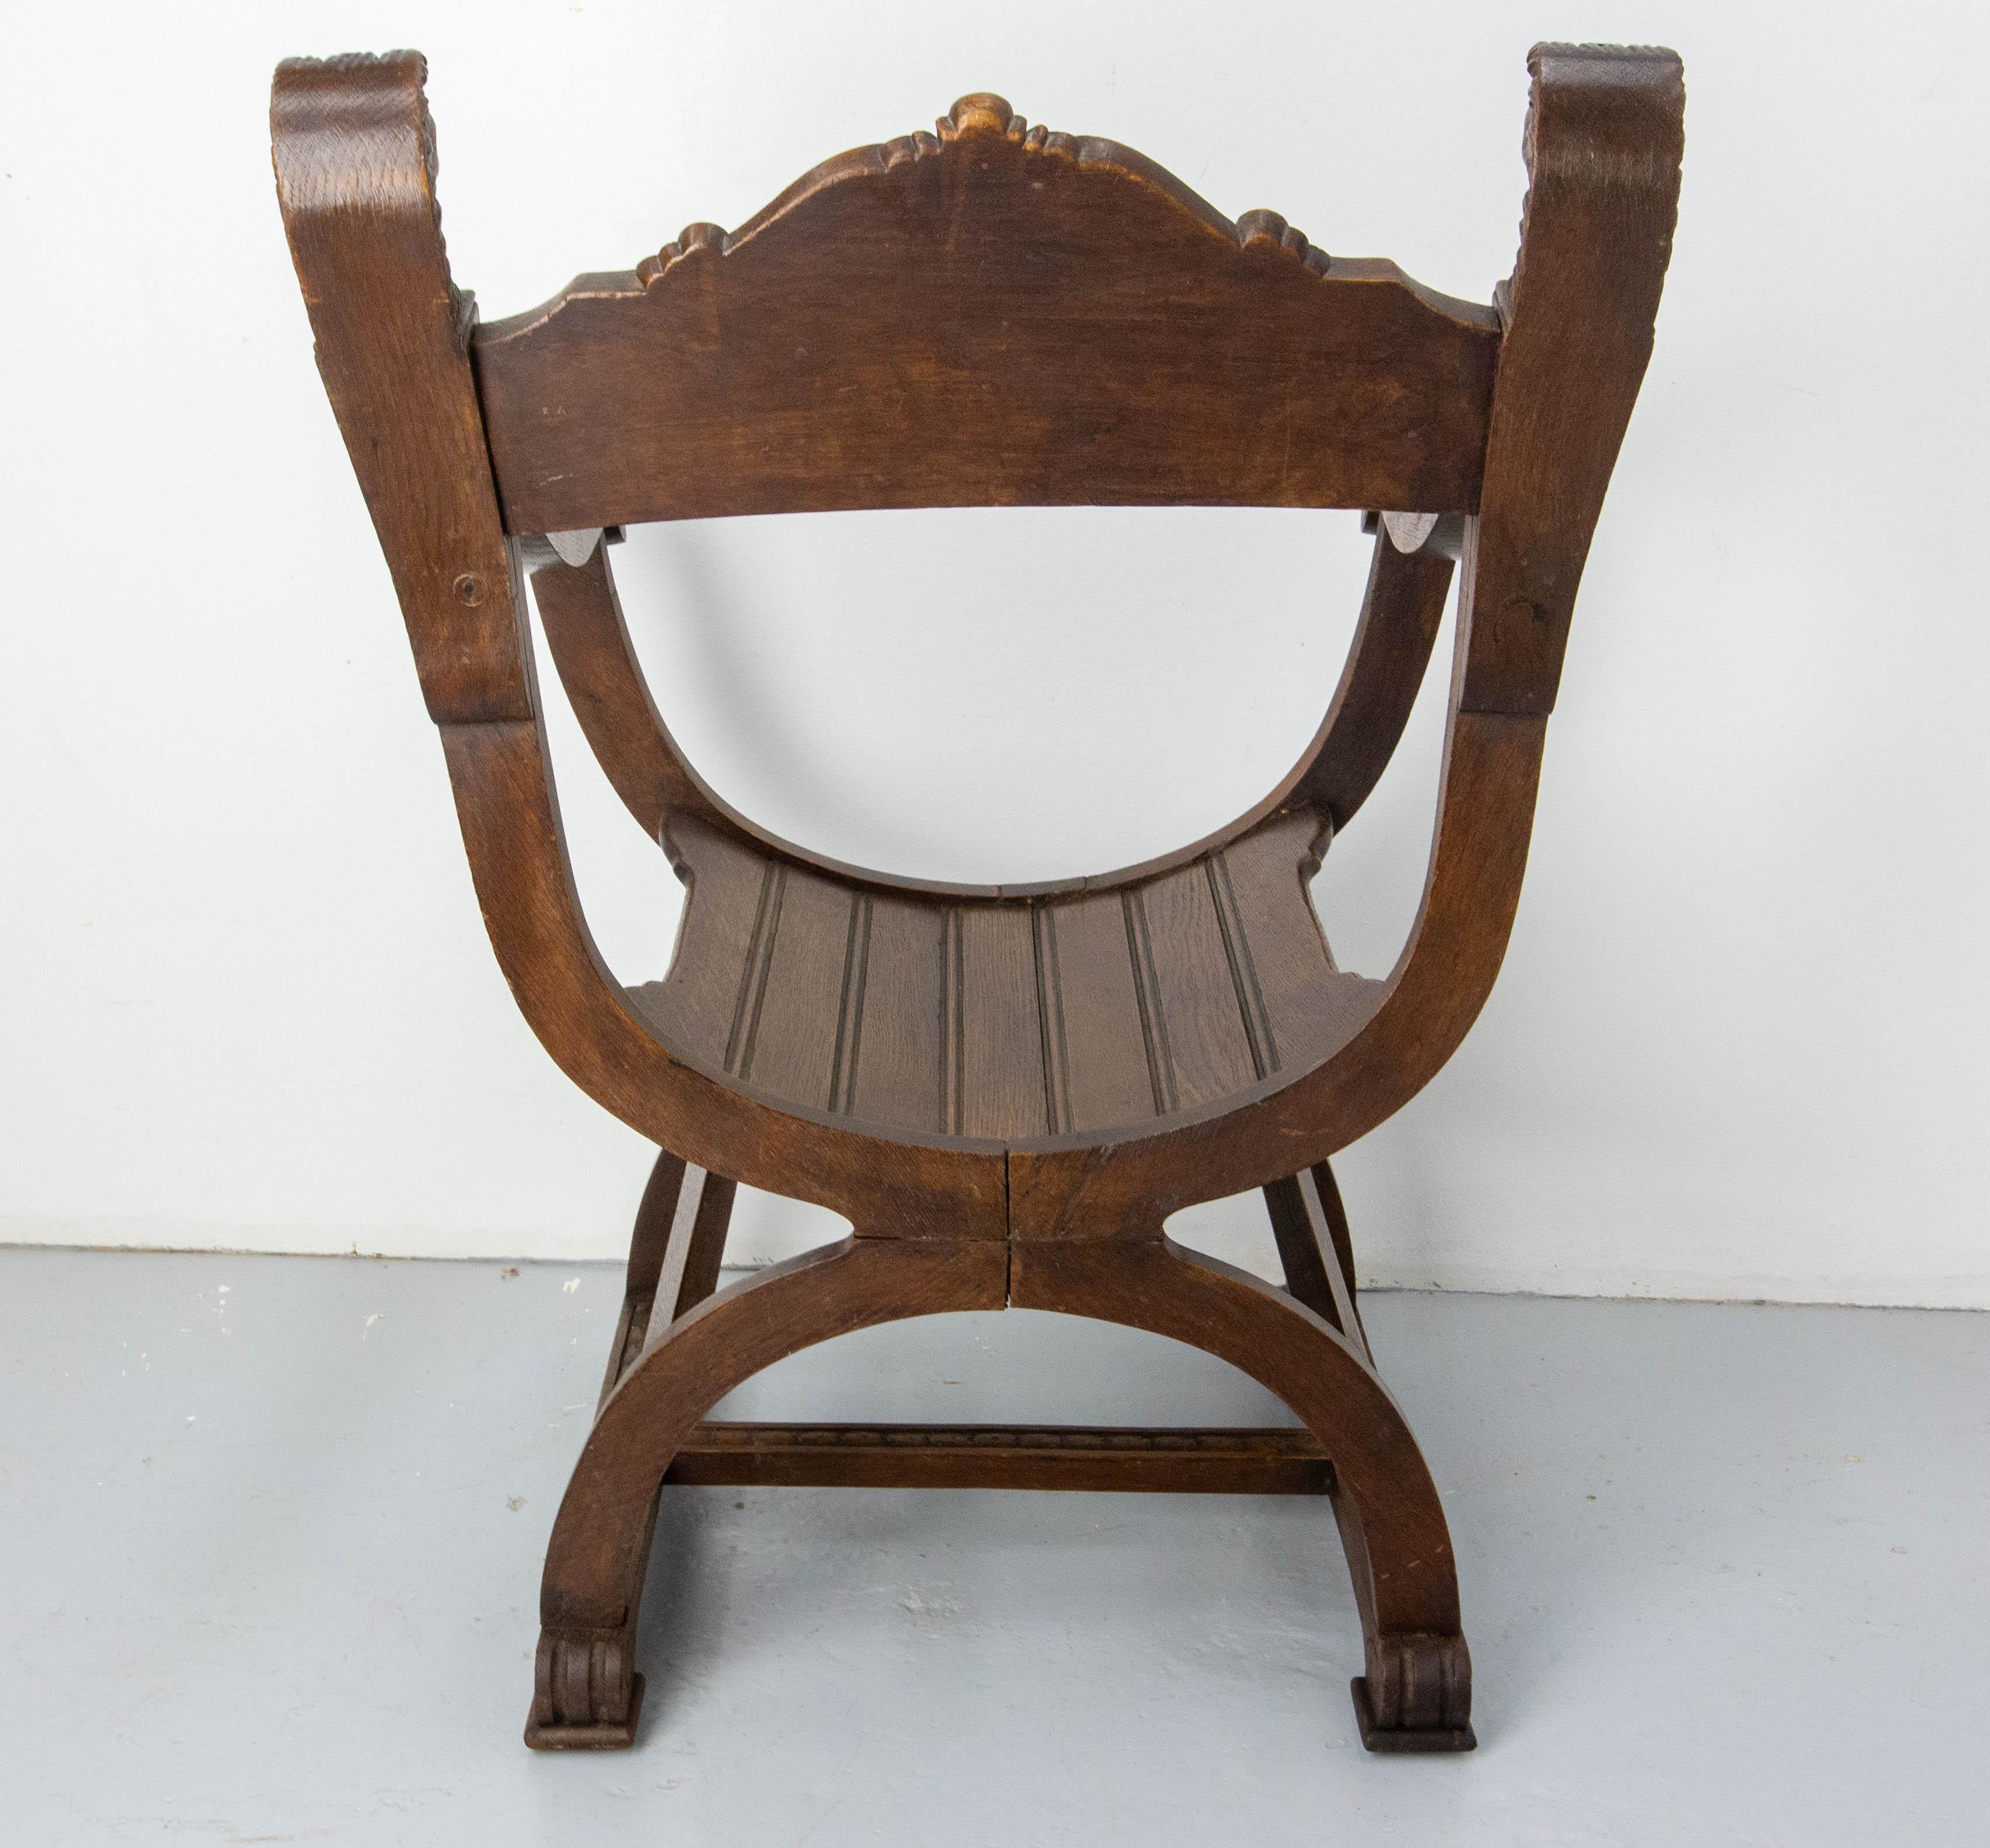 20th Century French Neogothic Chestnut Curule Armchair with Two Lionheads, French, circa 1900 For Sale